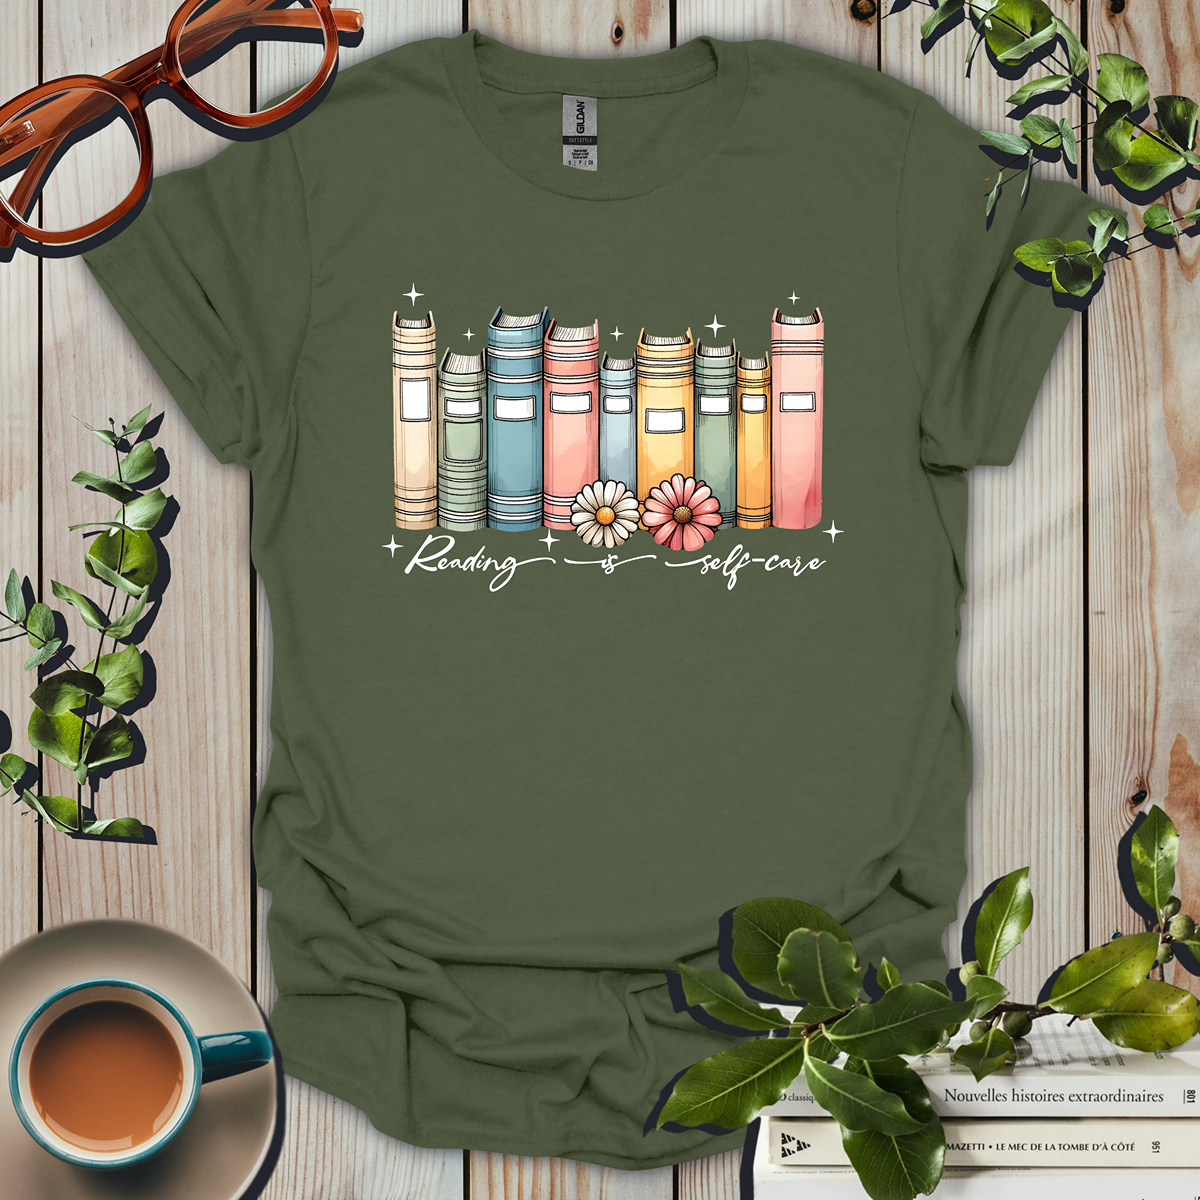 Reading Is Self-Care T-Shirt